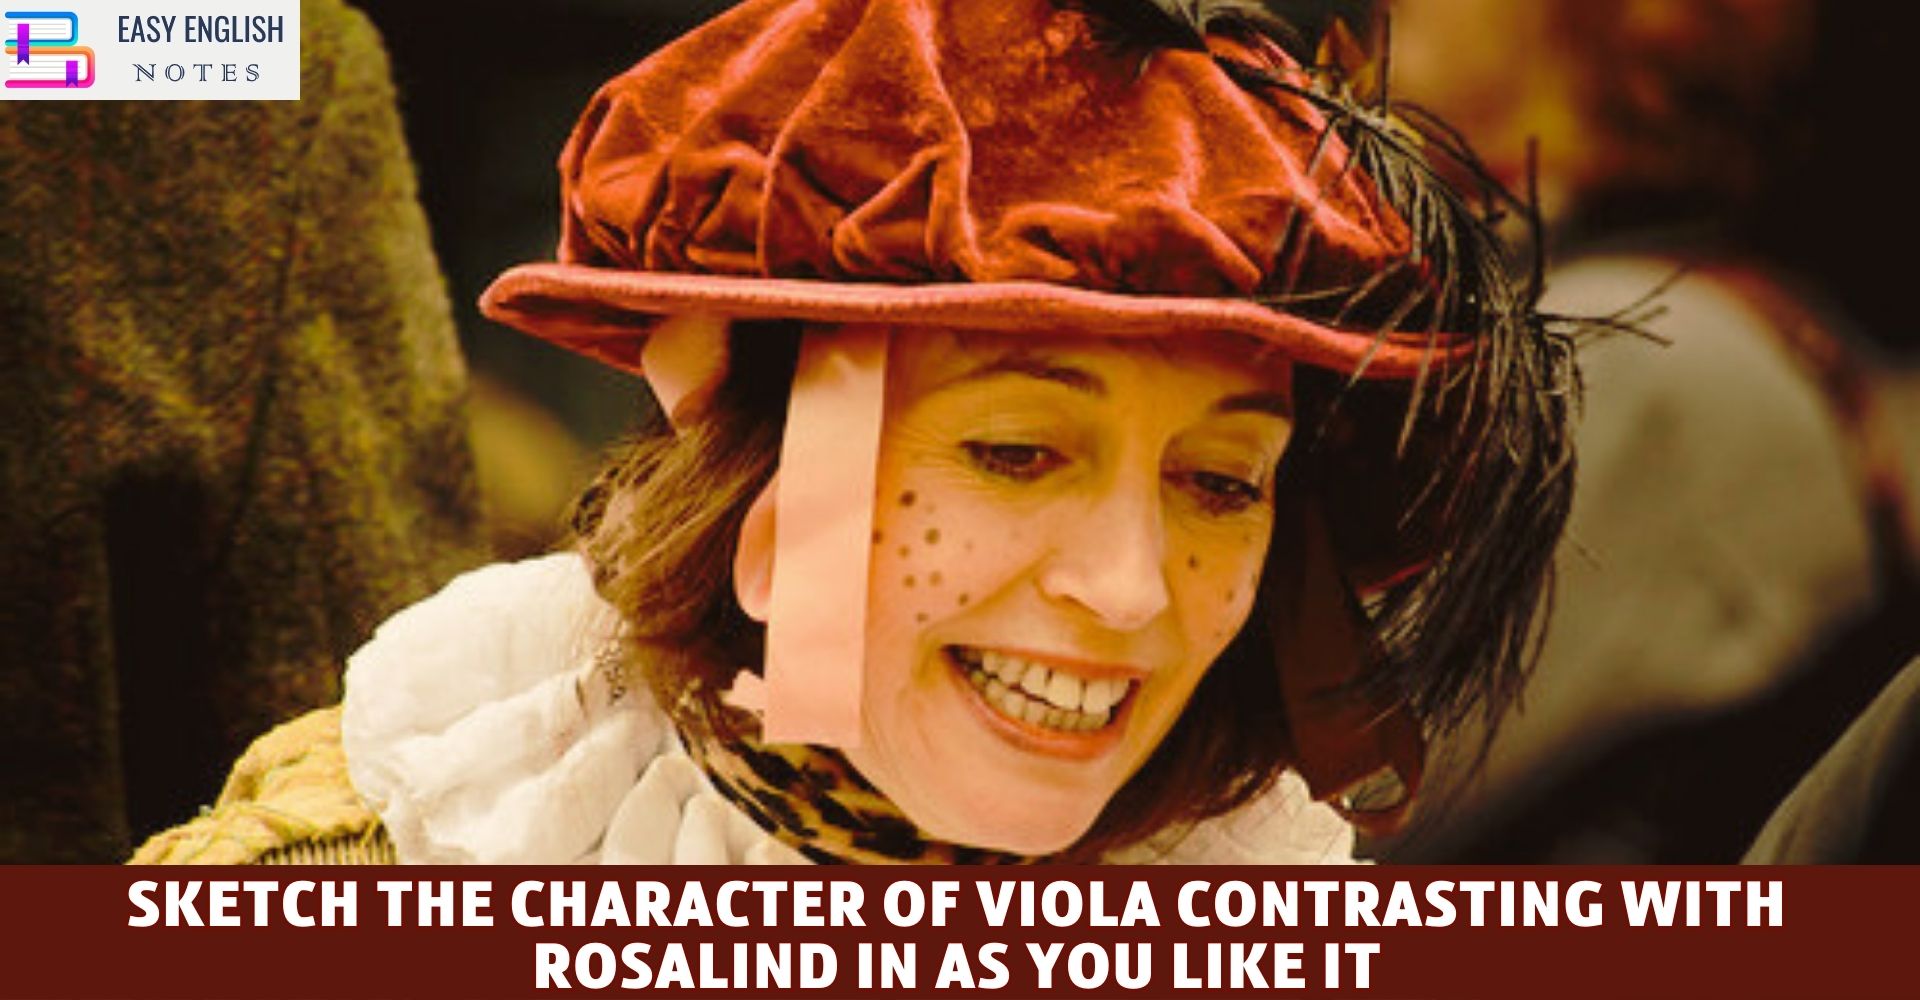 Sketch the character of Viola contrasting with Rosalind in As you Like it